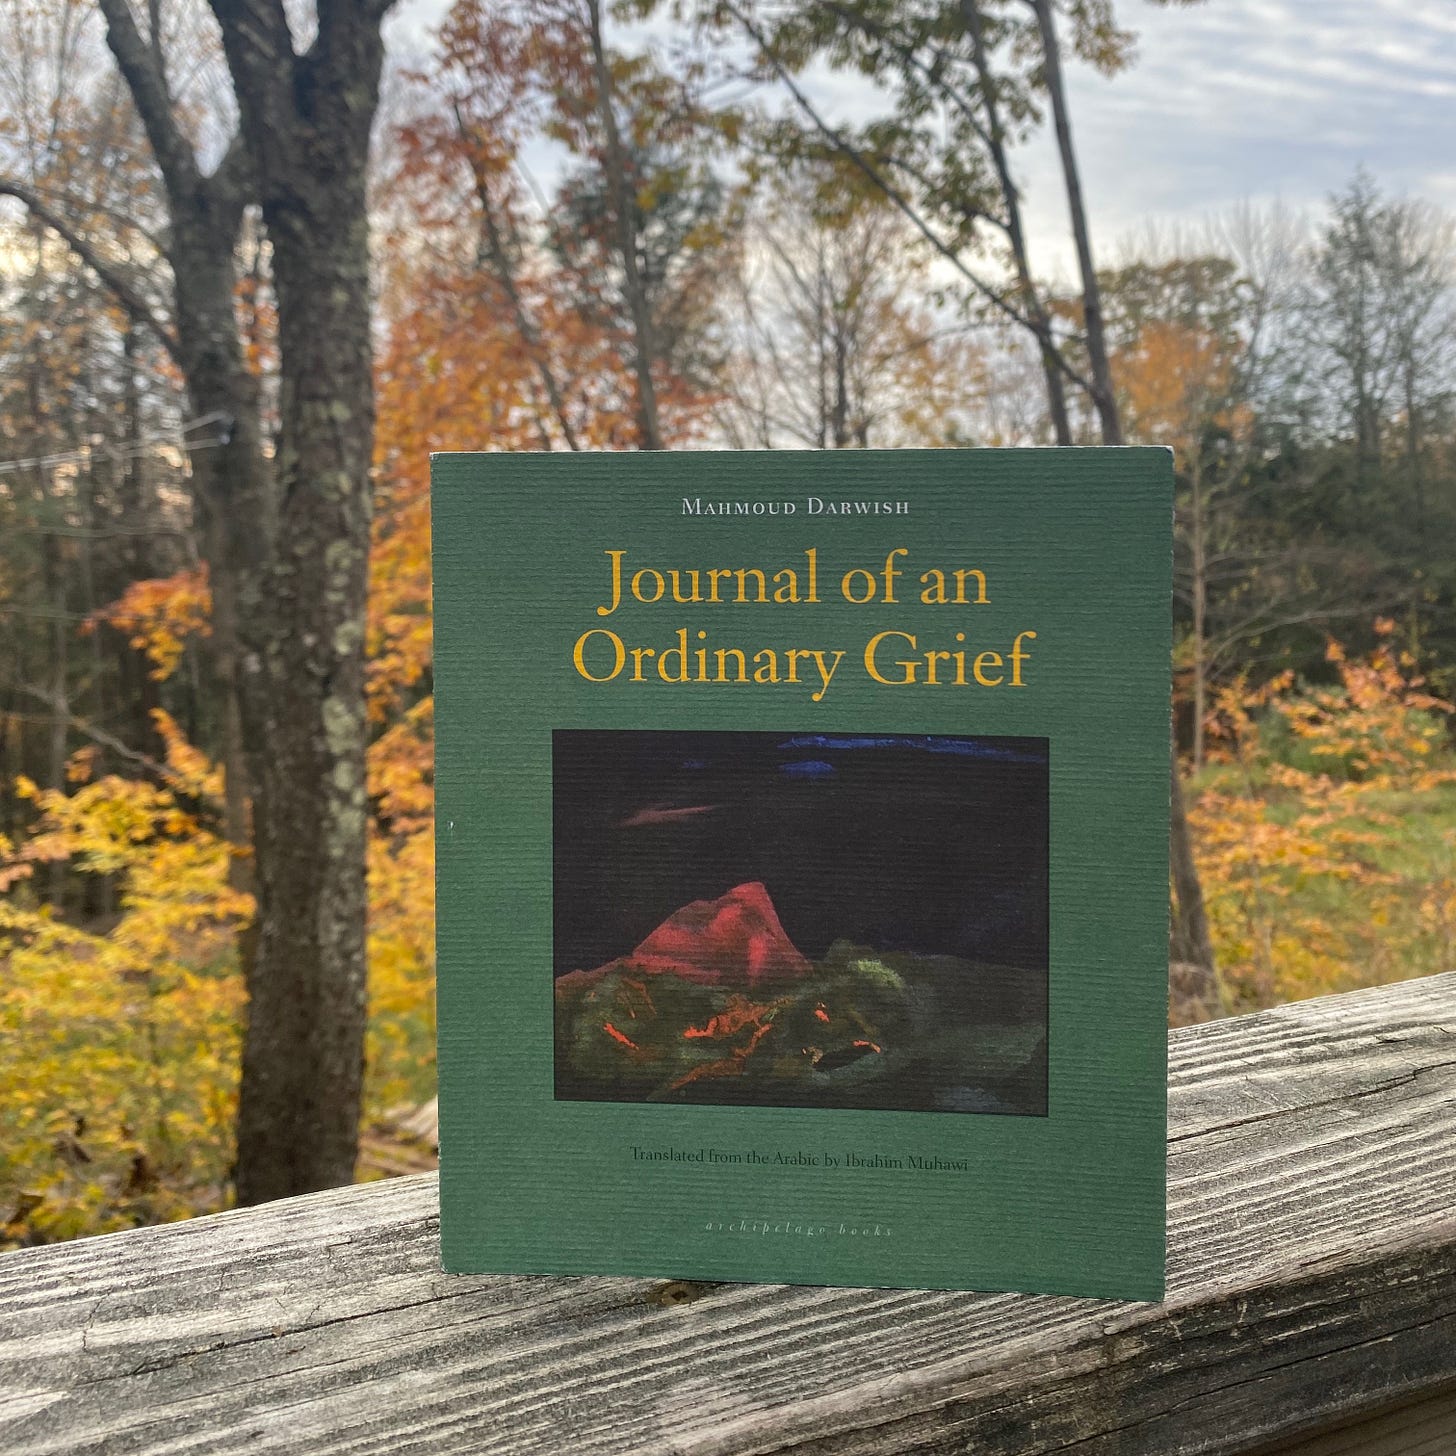 The green, square paperback of Journal of an Ordinary Grief standing upright on a porch railing in front of many golden beech trees.